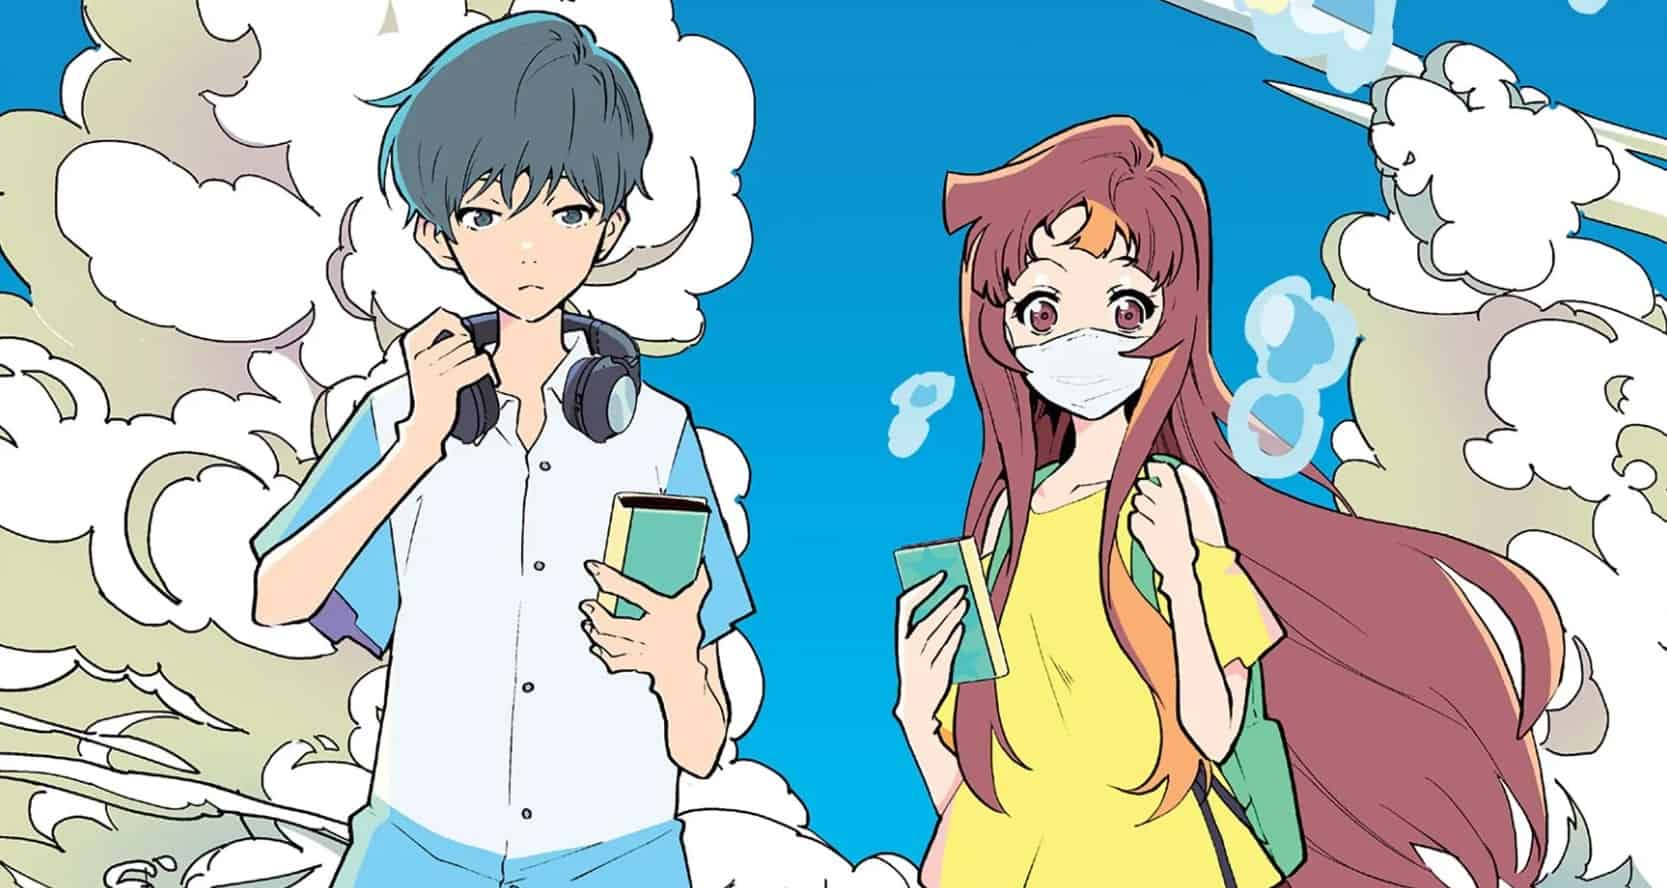 REVIEW: Worlds Bubble Up Like Soda Pop Is an Adorable Summer Love Story